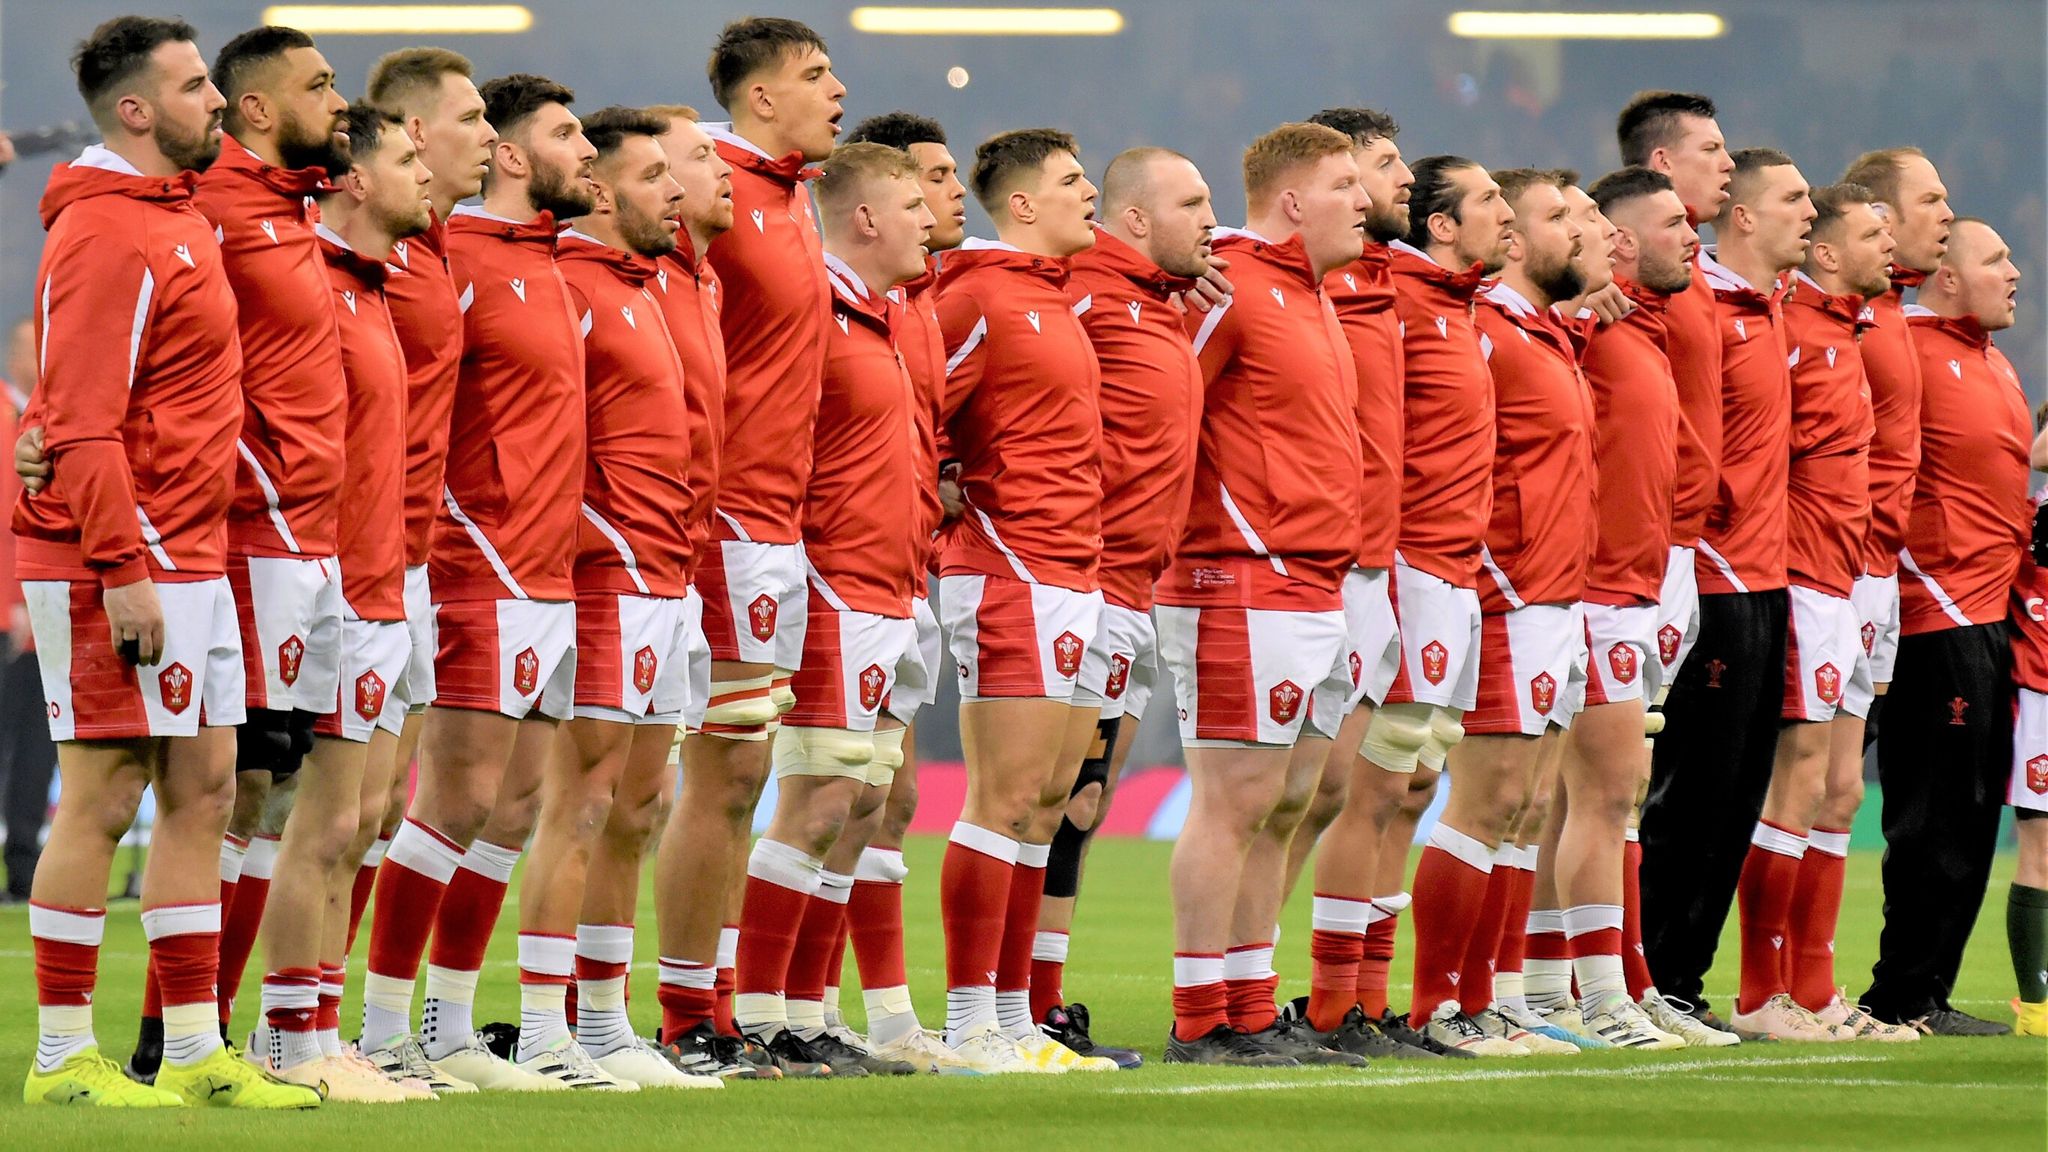 Wales reach agreement with board over contract dispute Wales vs England goes ahead Rugby Union News Sky Sports